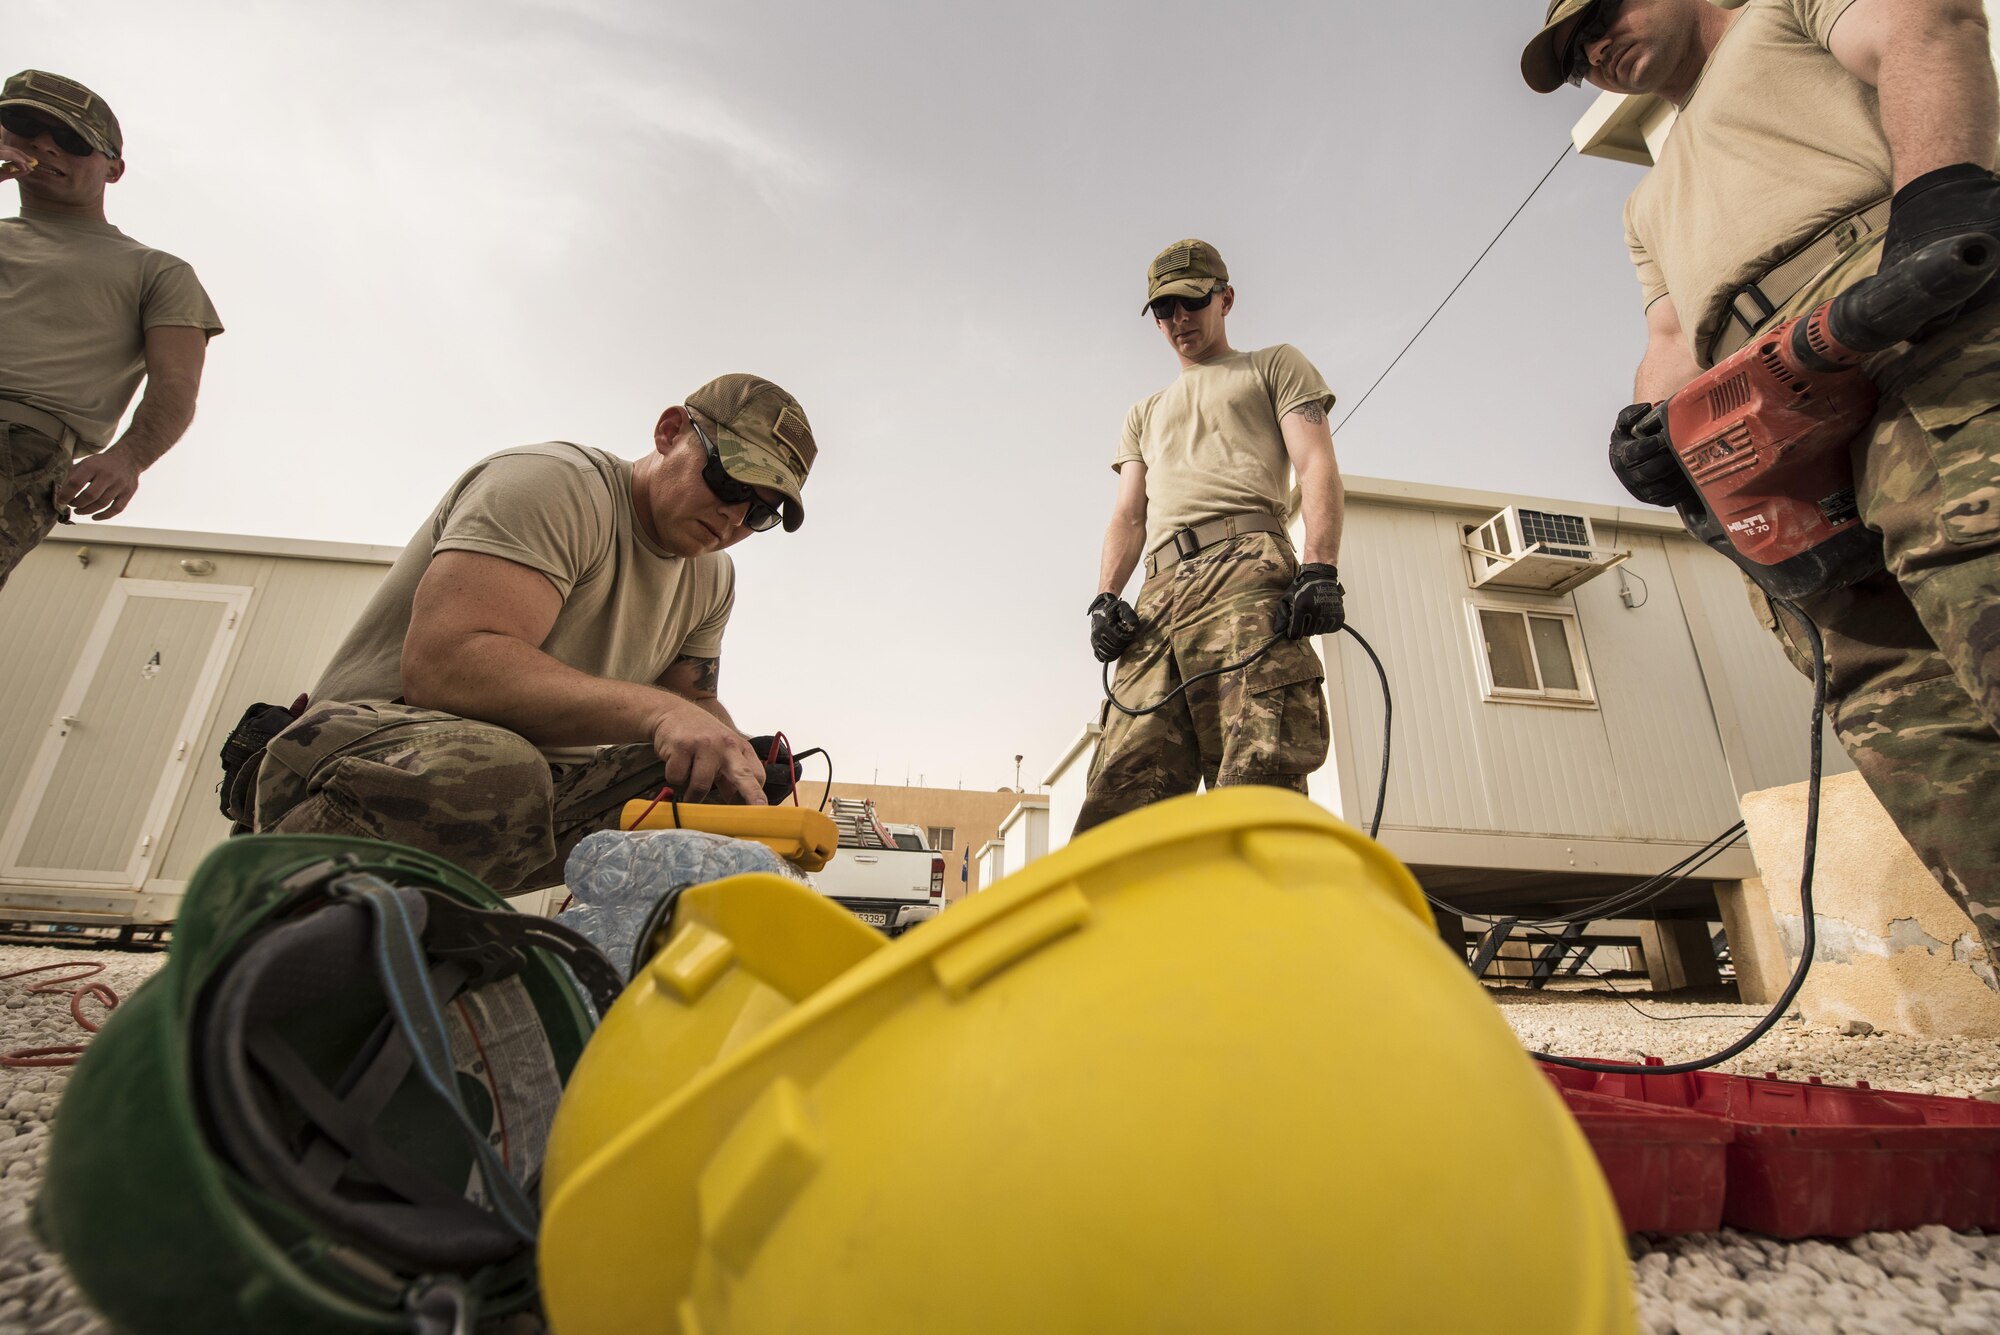 Airmen from the 332nd Expeditionary Communications Squadron set up power for their tools before starting a base-wide wireless internet improvement project Nov. 13, 2017 in Southwest Asia. The project required that the team run copper wire both underground and across rooftops to establish reliable connectivity in living and recreation areas. (U.S. Air Force by Senior Airman Joshua Kleinholz)